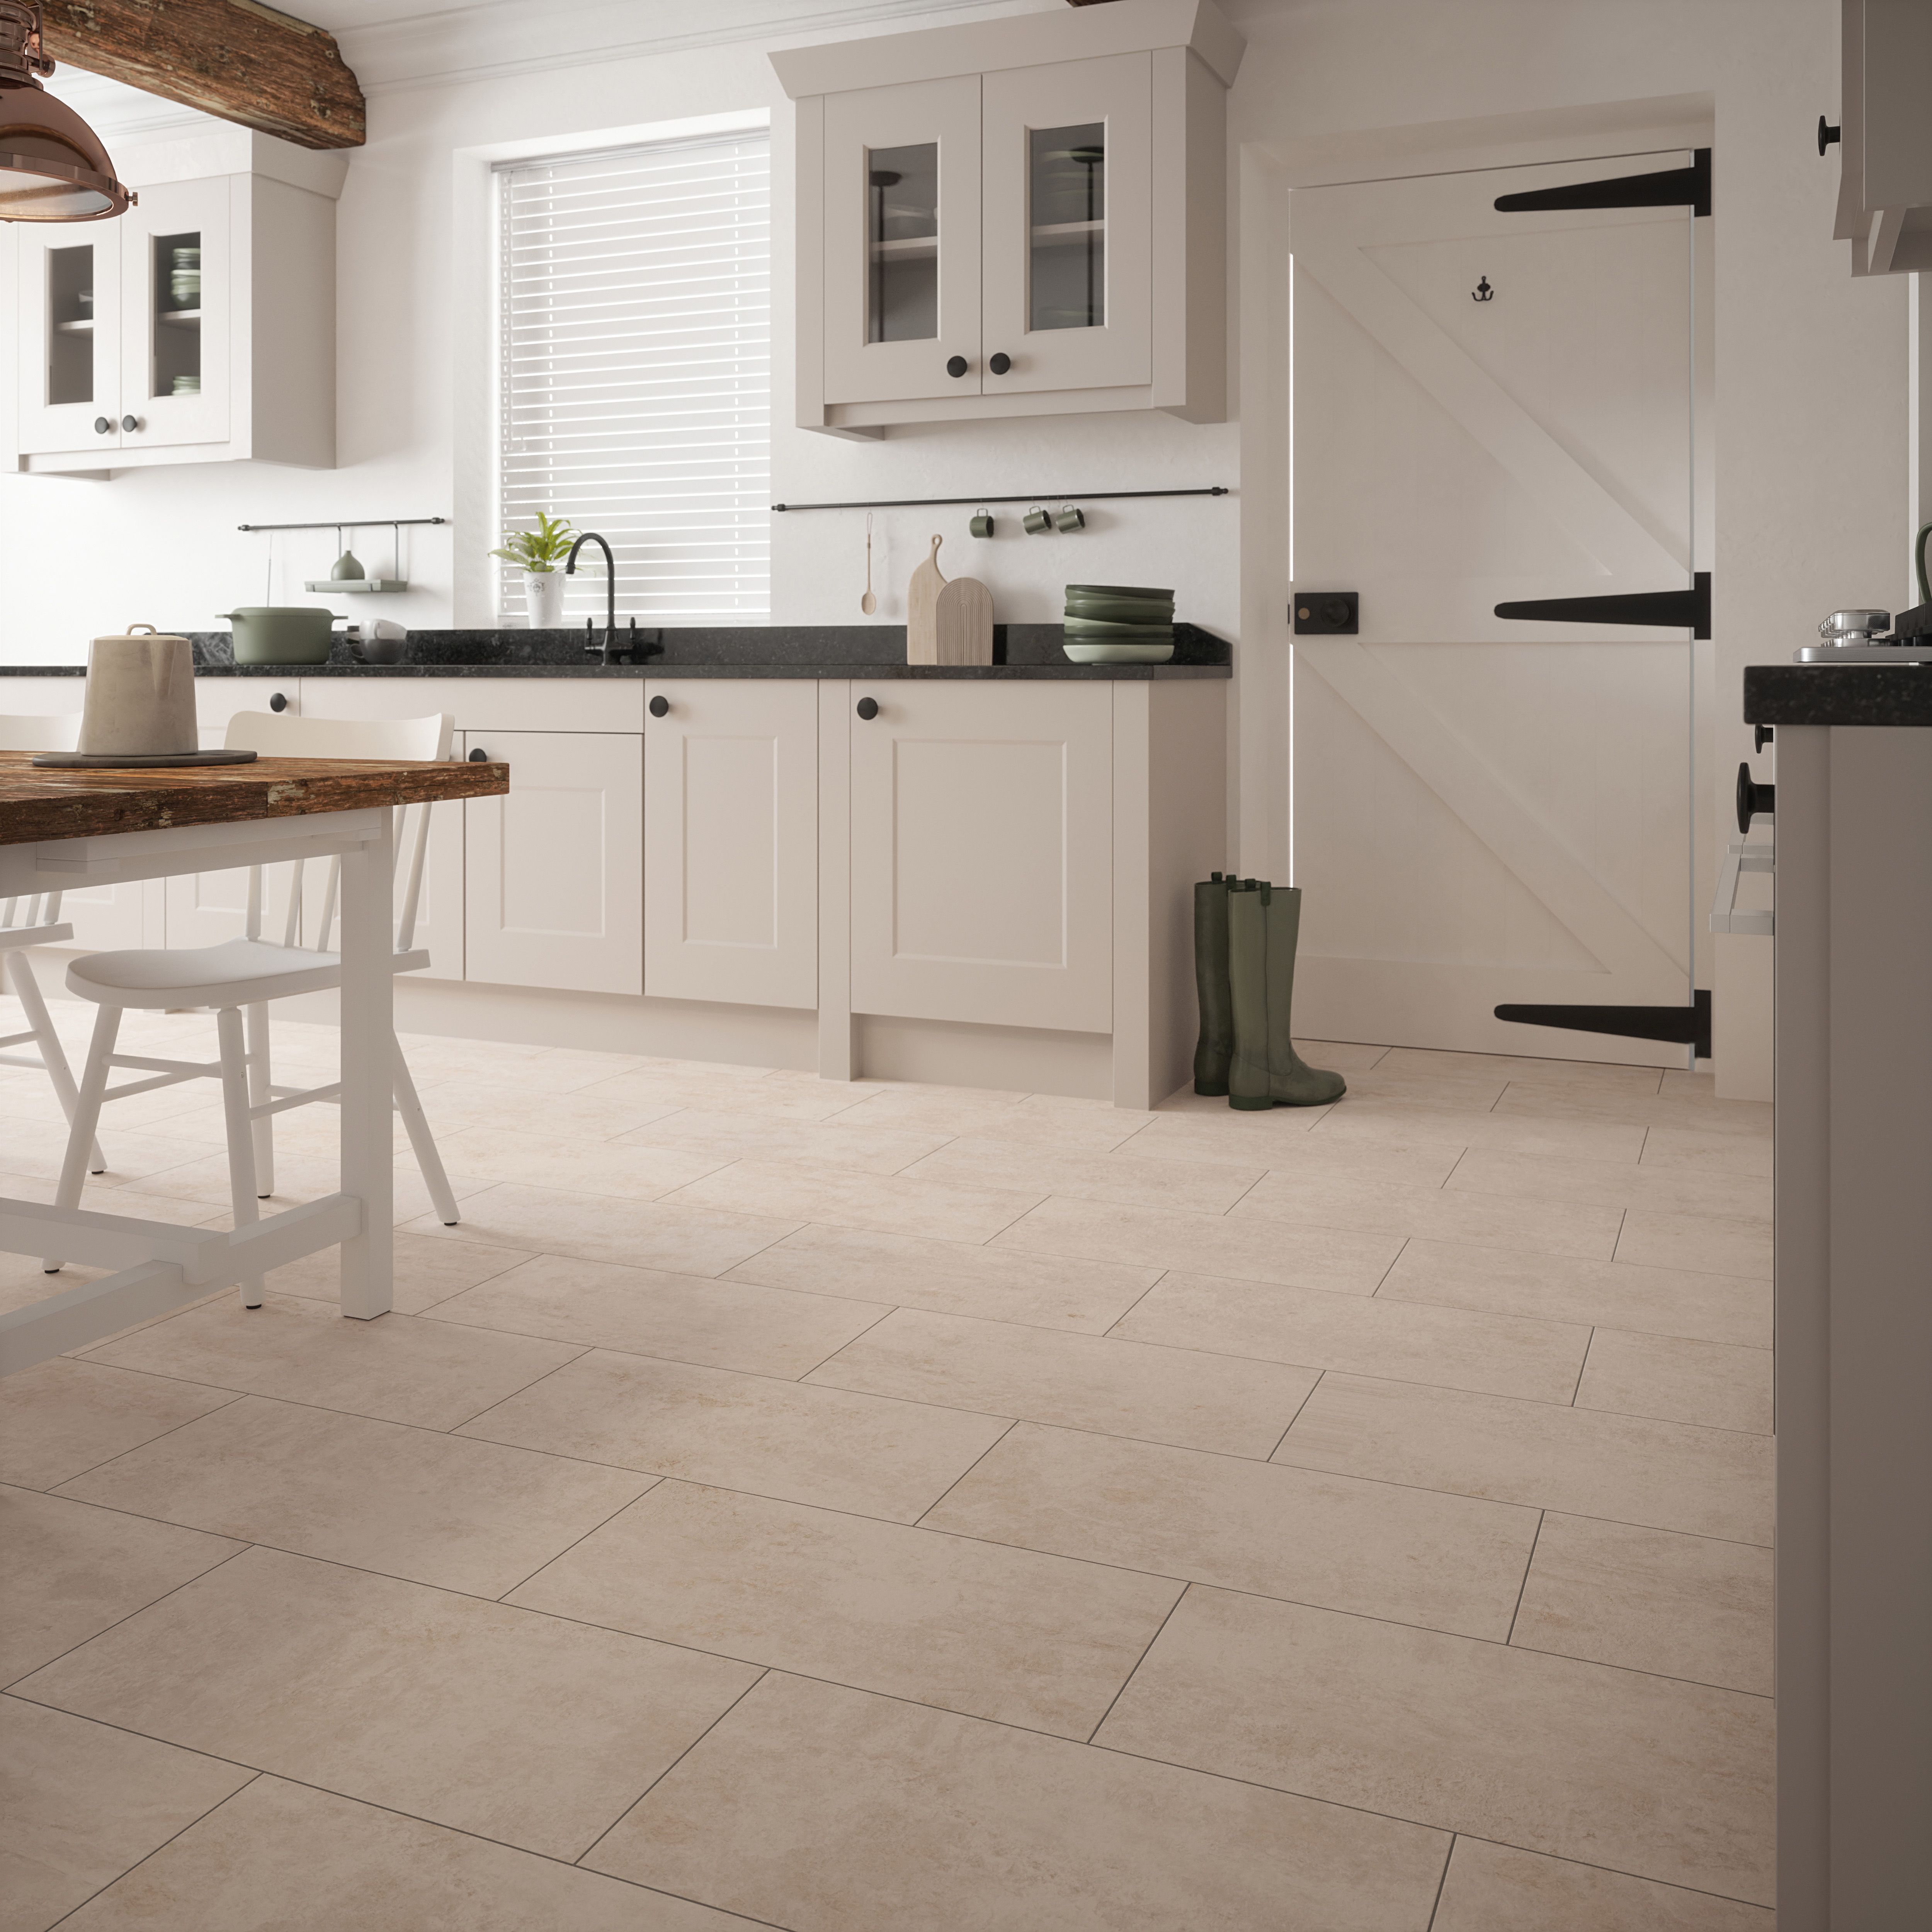 Image of Wickes City Stone Beige Ceramic Wall and Floor Tile 600 x 300mm